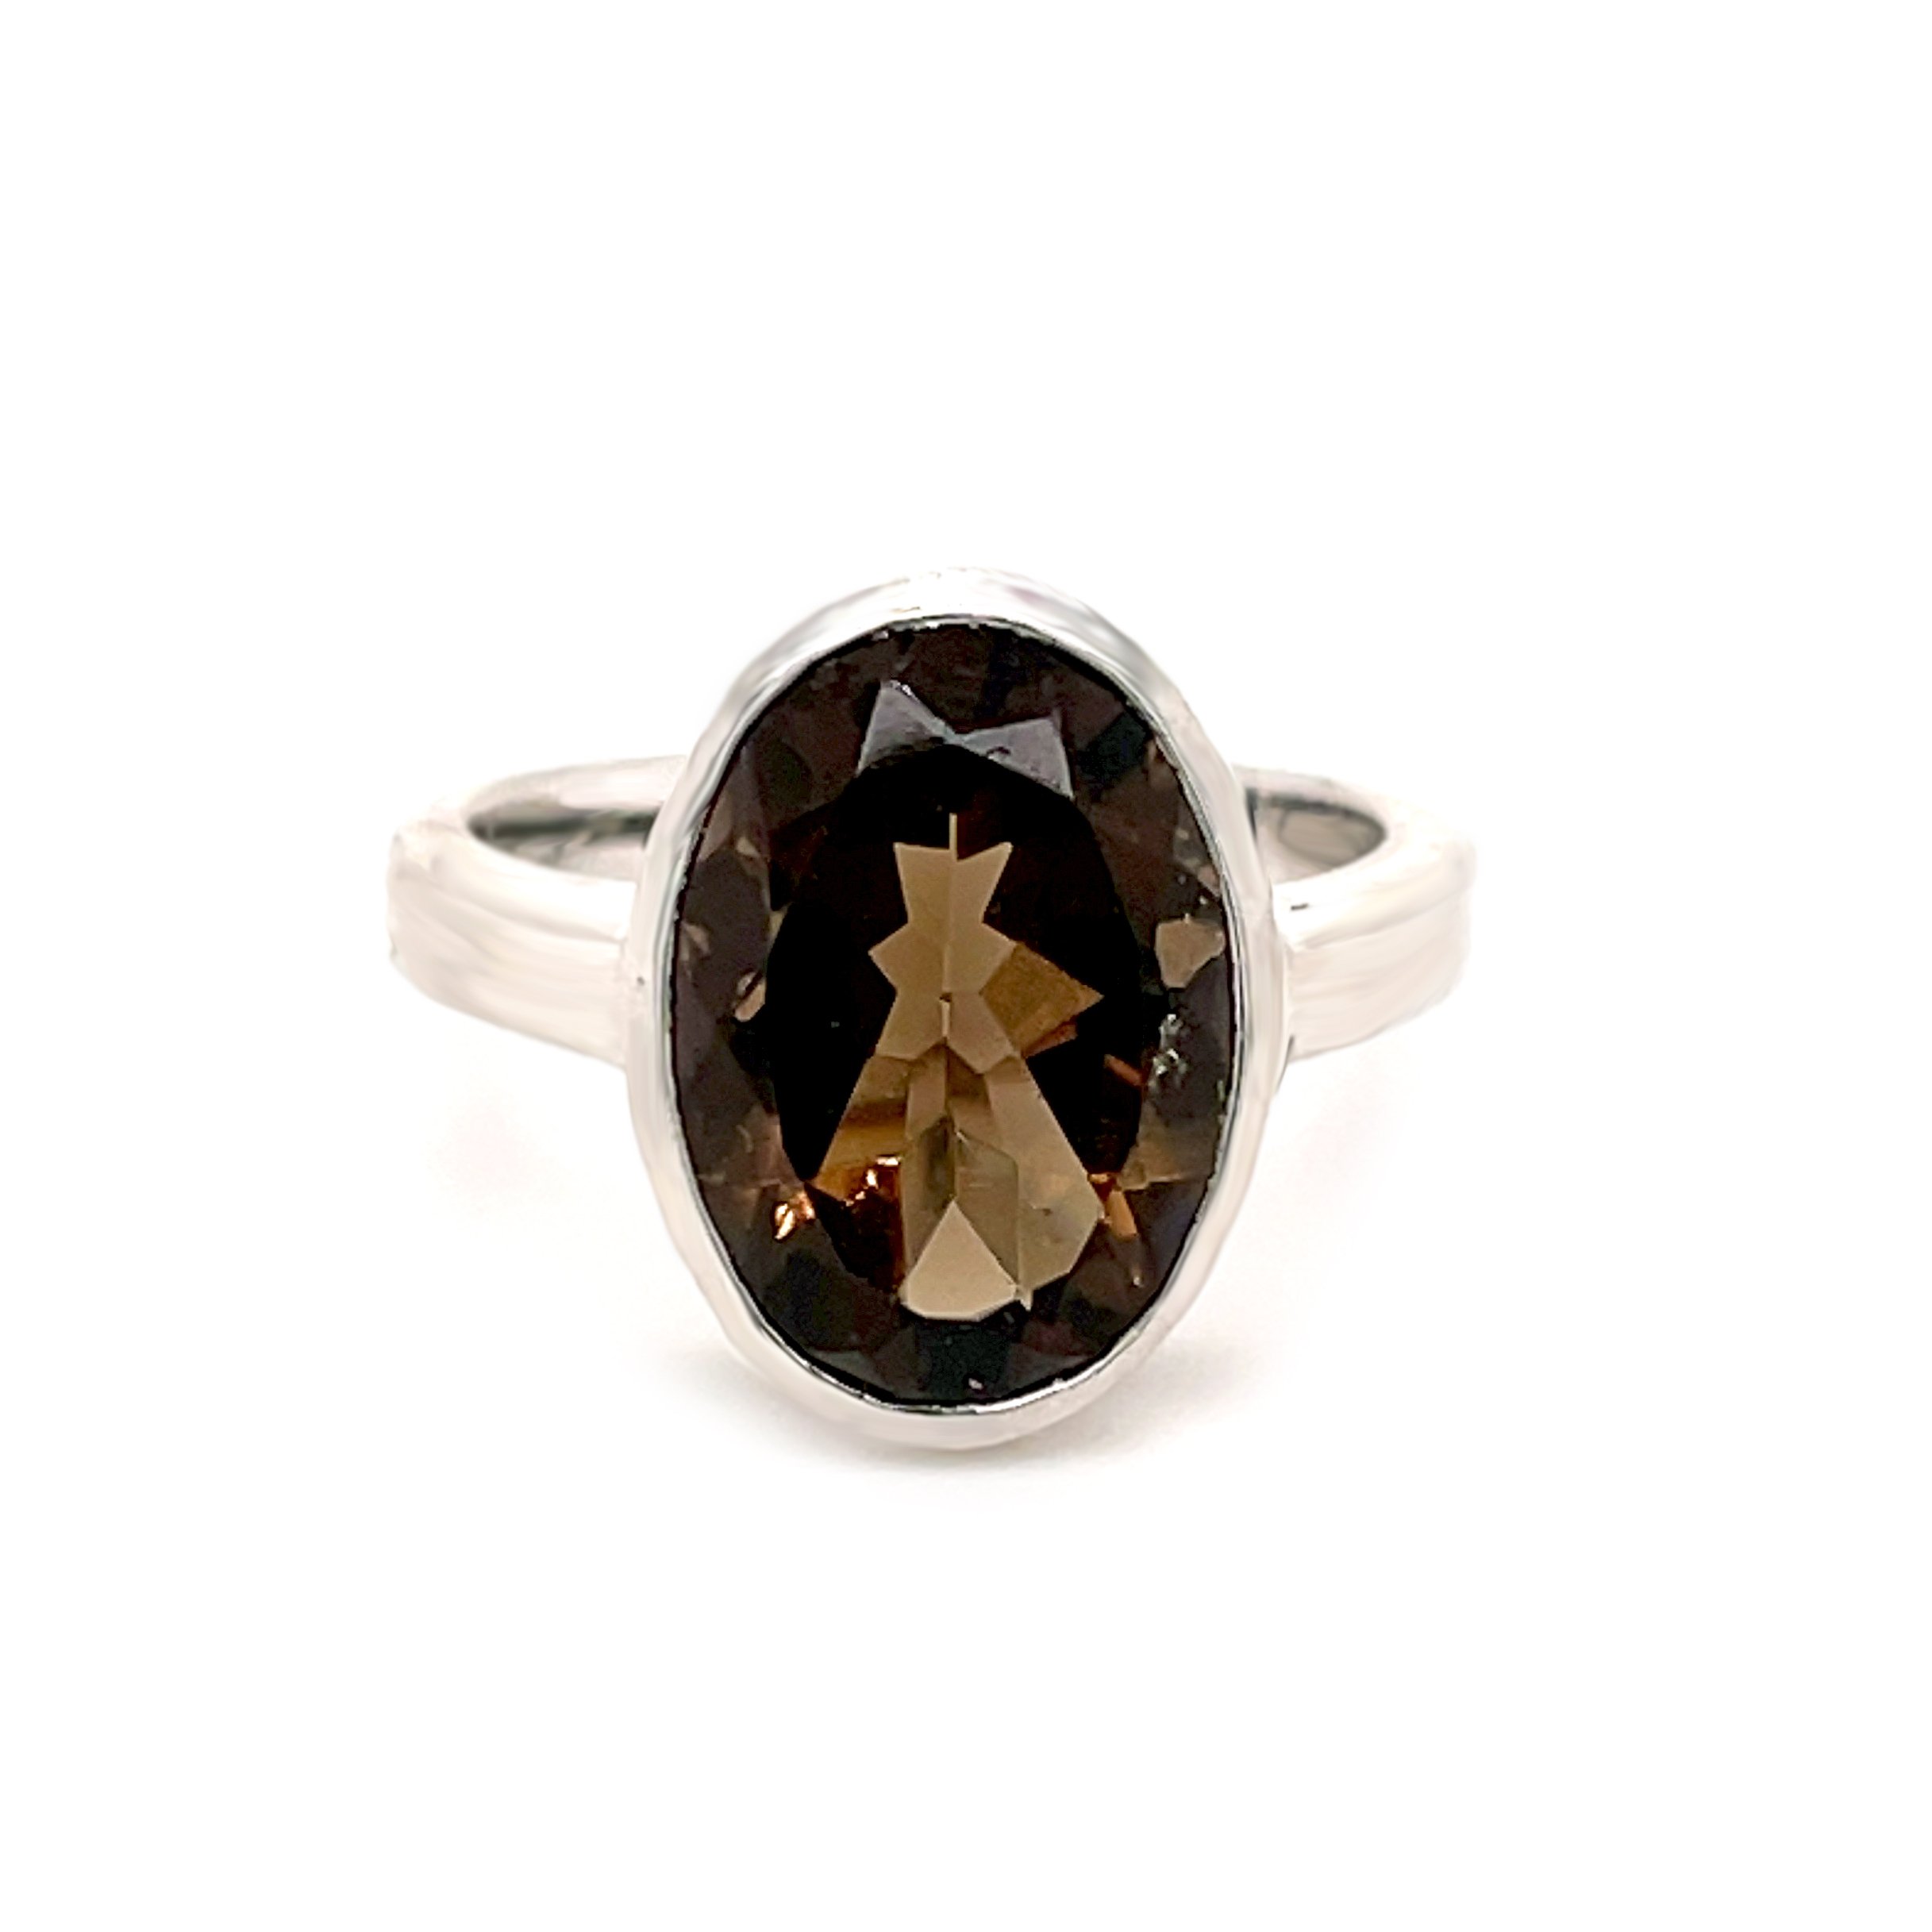 Smoky Quartz Ring Size 5 - Faceted Oval With Raised Silver Cutout Bezel & Tapered Band